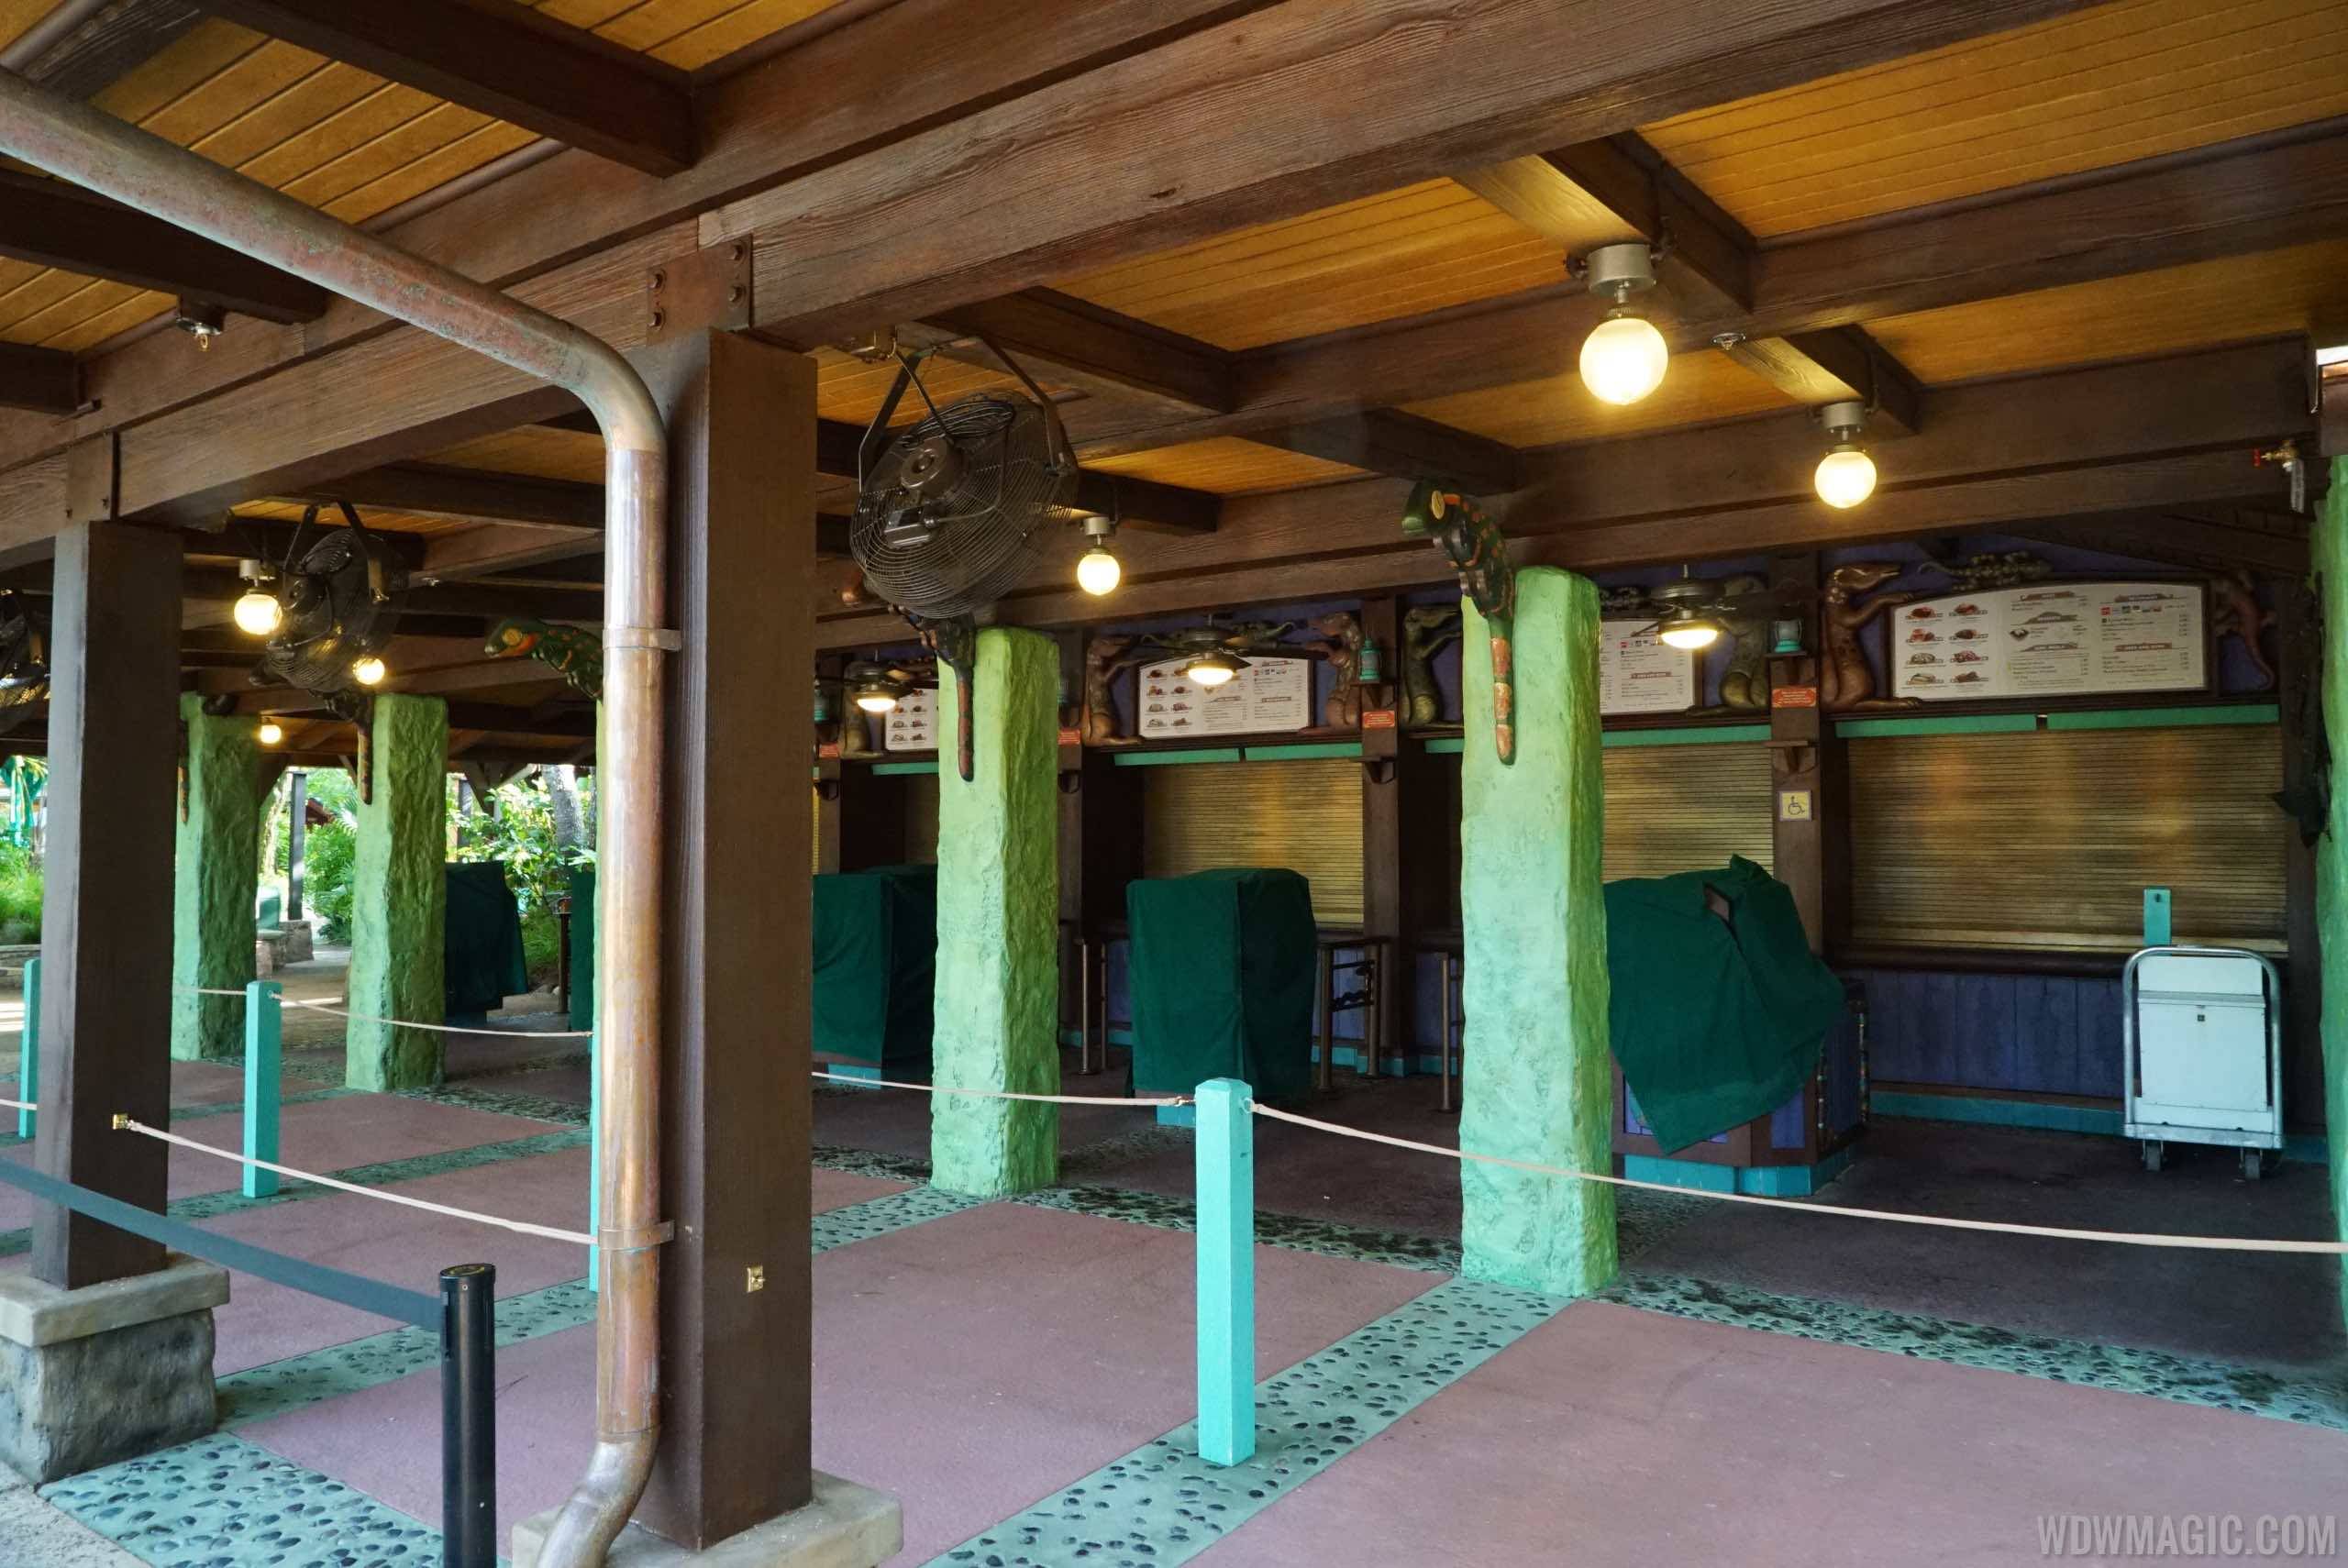 Flame Tree Barbecue - New covered ordering area